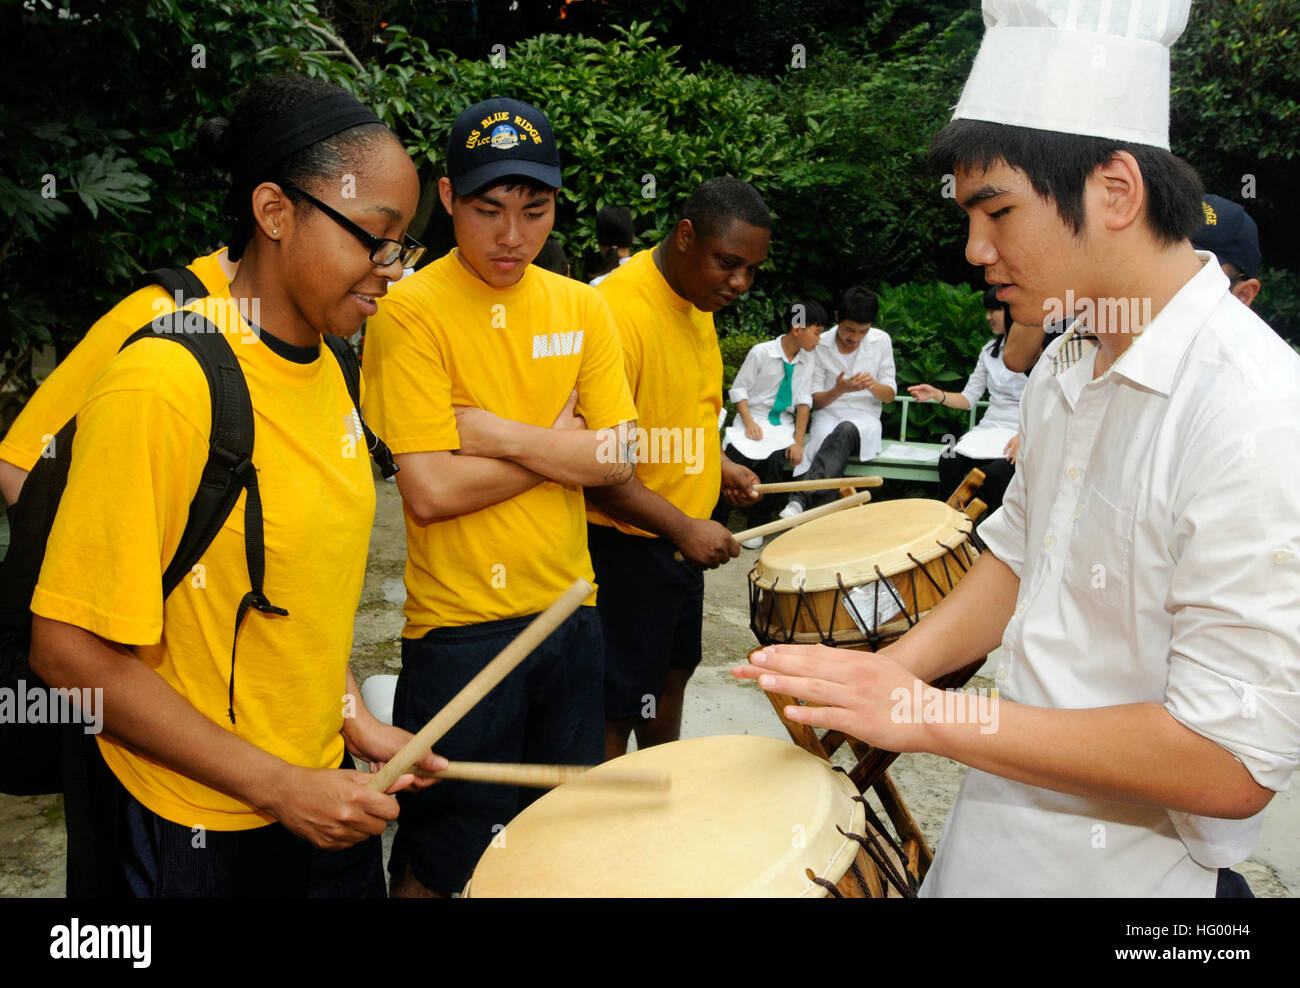 110817-N-XG305-240 BUSAN, Republic of Korea (Aug. 17, 2011) Seaman Daynesha Lewis, assigned to the U.S. 7th Fleet command ship USS Blue Ridge (LCC 19), receives a drumming lesson from Young Jin Lee during a community service project at Hee-Rak-Won Children's Welfare Facility. Blue Ridge is in Republic of Korea to participate in Ulchi Freedom Guardian 2011. (U.S. Navy photo by Mass Communication Specialist 3rd Class Mel Orr/Released) US Navy 110817-N-XG305-240 Seaman Daynesha Lewis, assigned to the U.S. 7th Fleet command ship USS Blue Ridge (LCC 19), receives a drumming lesson f Stock Photo